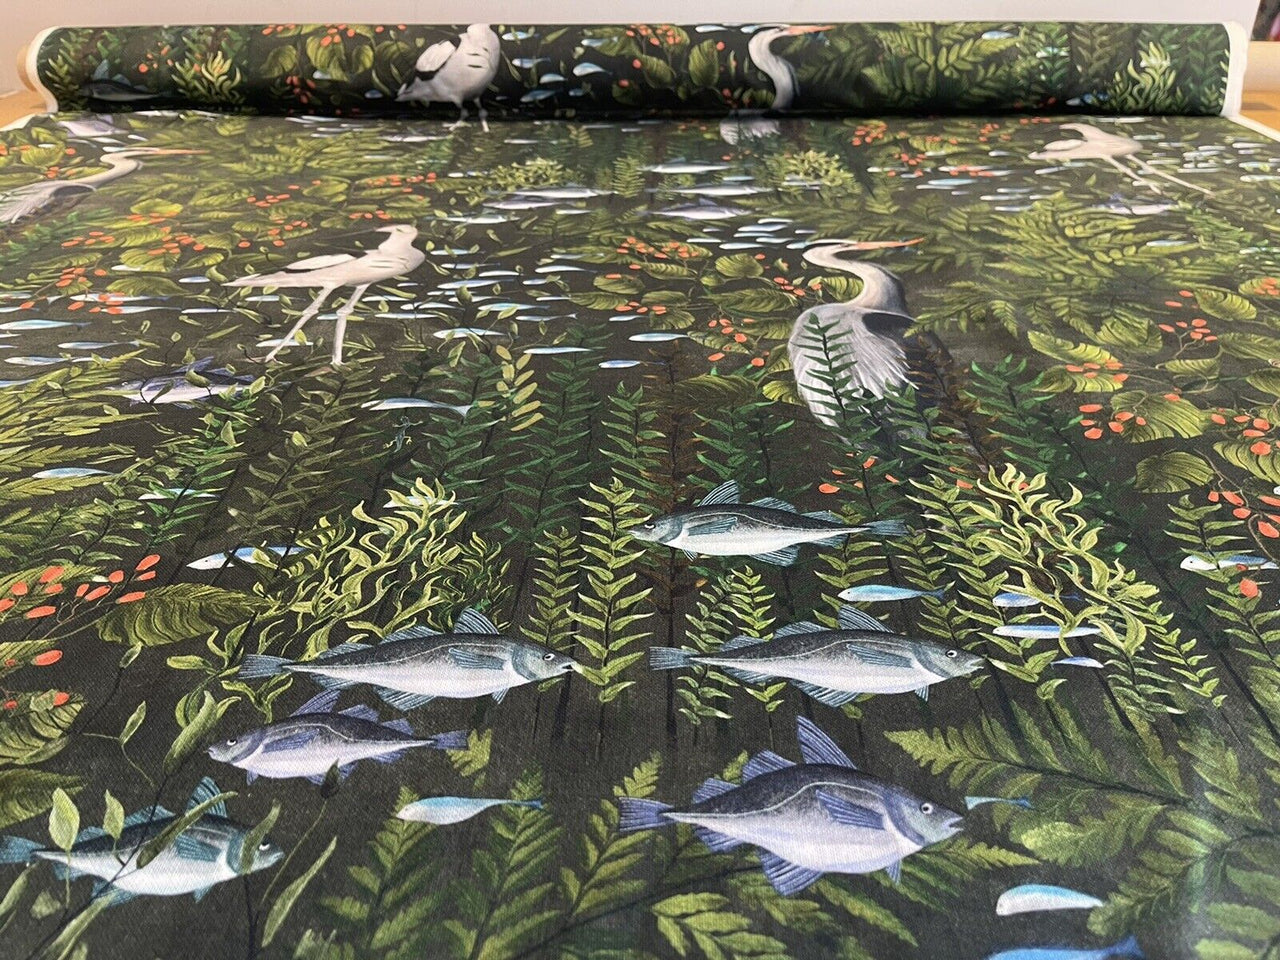 Fish Herons Birds Cotton Fabric by Meter Dark Sewing Material Green Textile Animals Pattern Textile